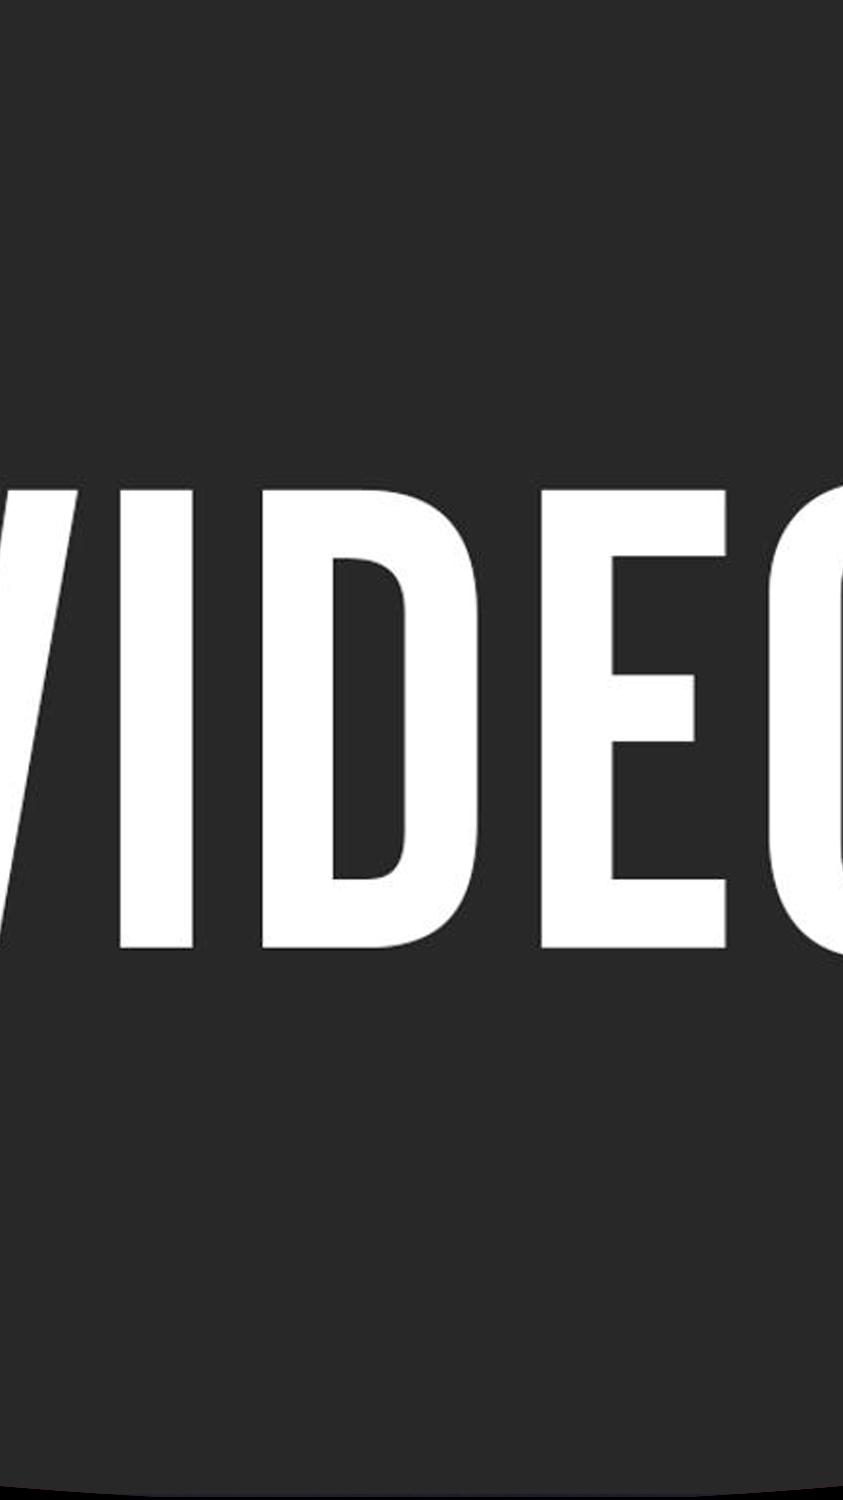 Xvideostudio Video Editor Apk For Android Apk Download